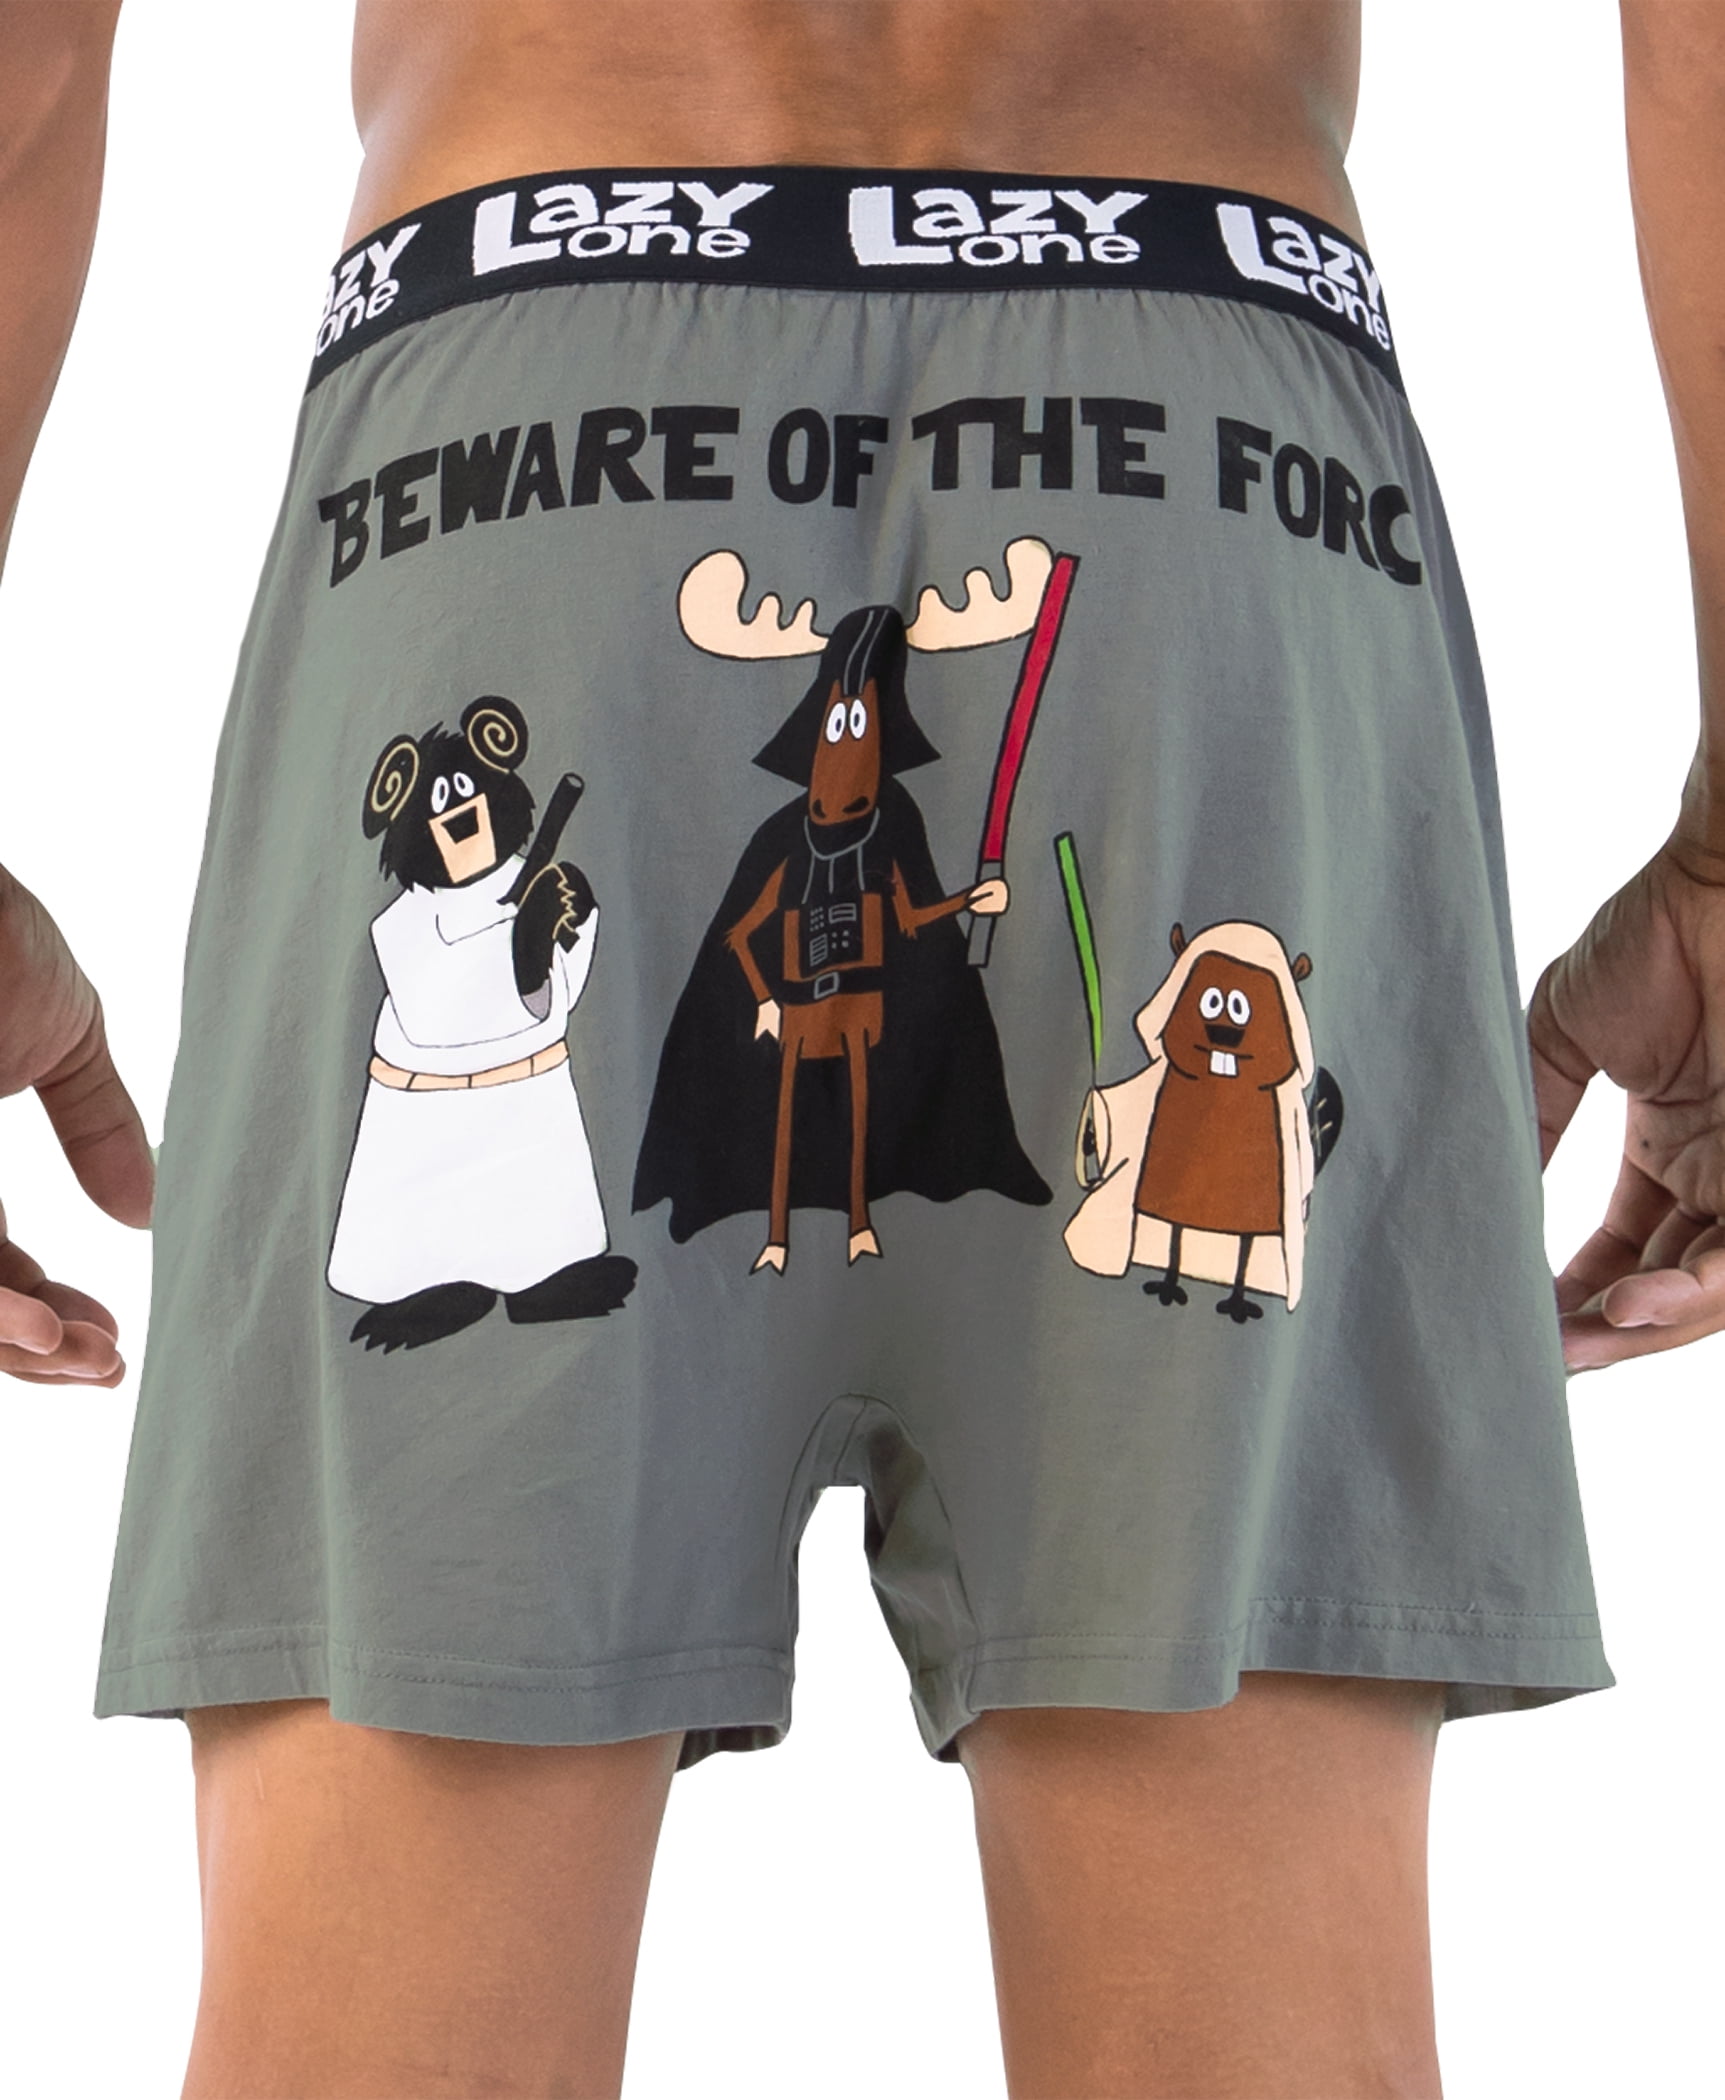 LazyOne Funny Animal Boxers, Humorous Underwear, Gag Gifts for Men, Beware  of the Force 